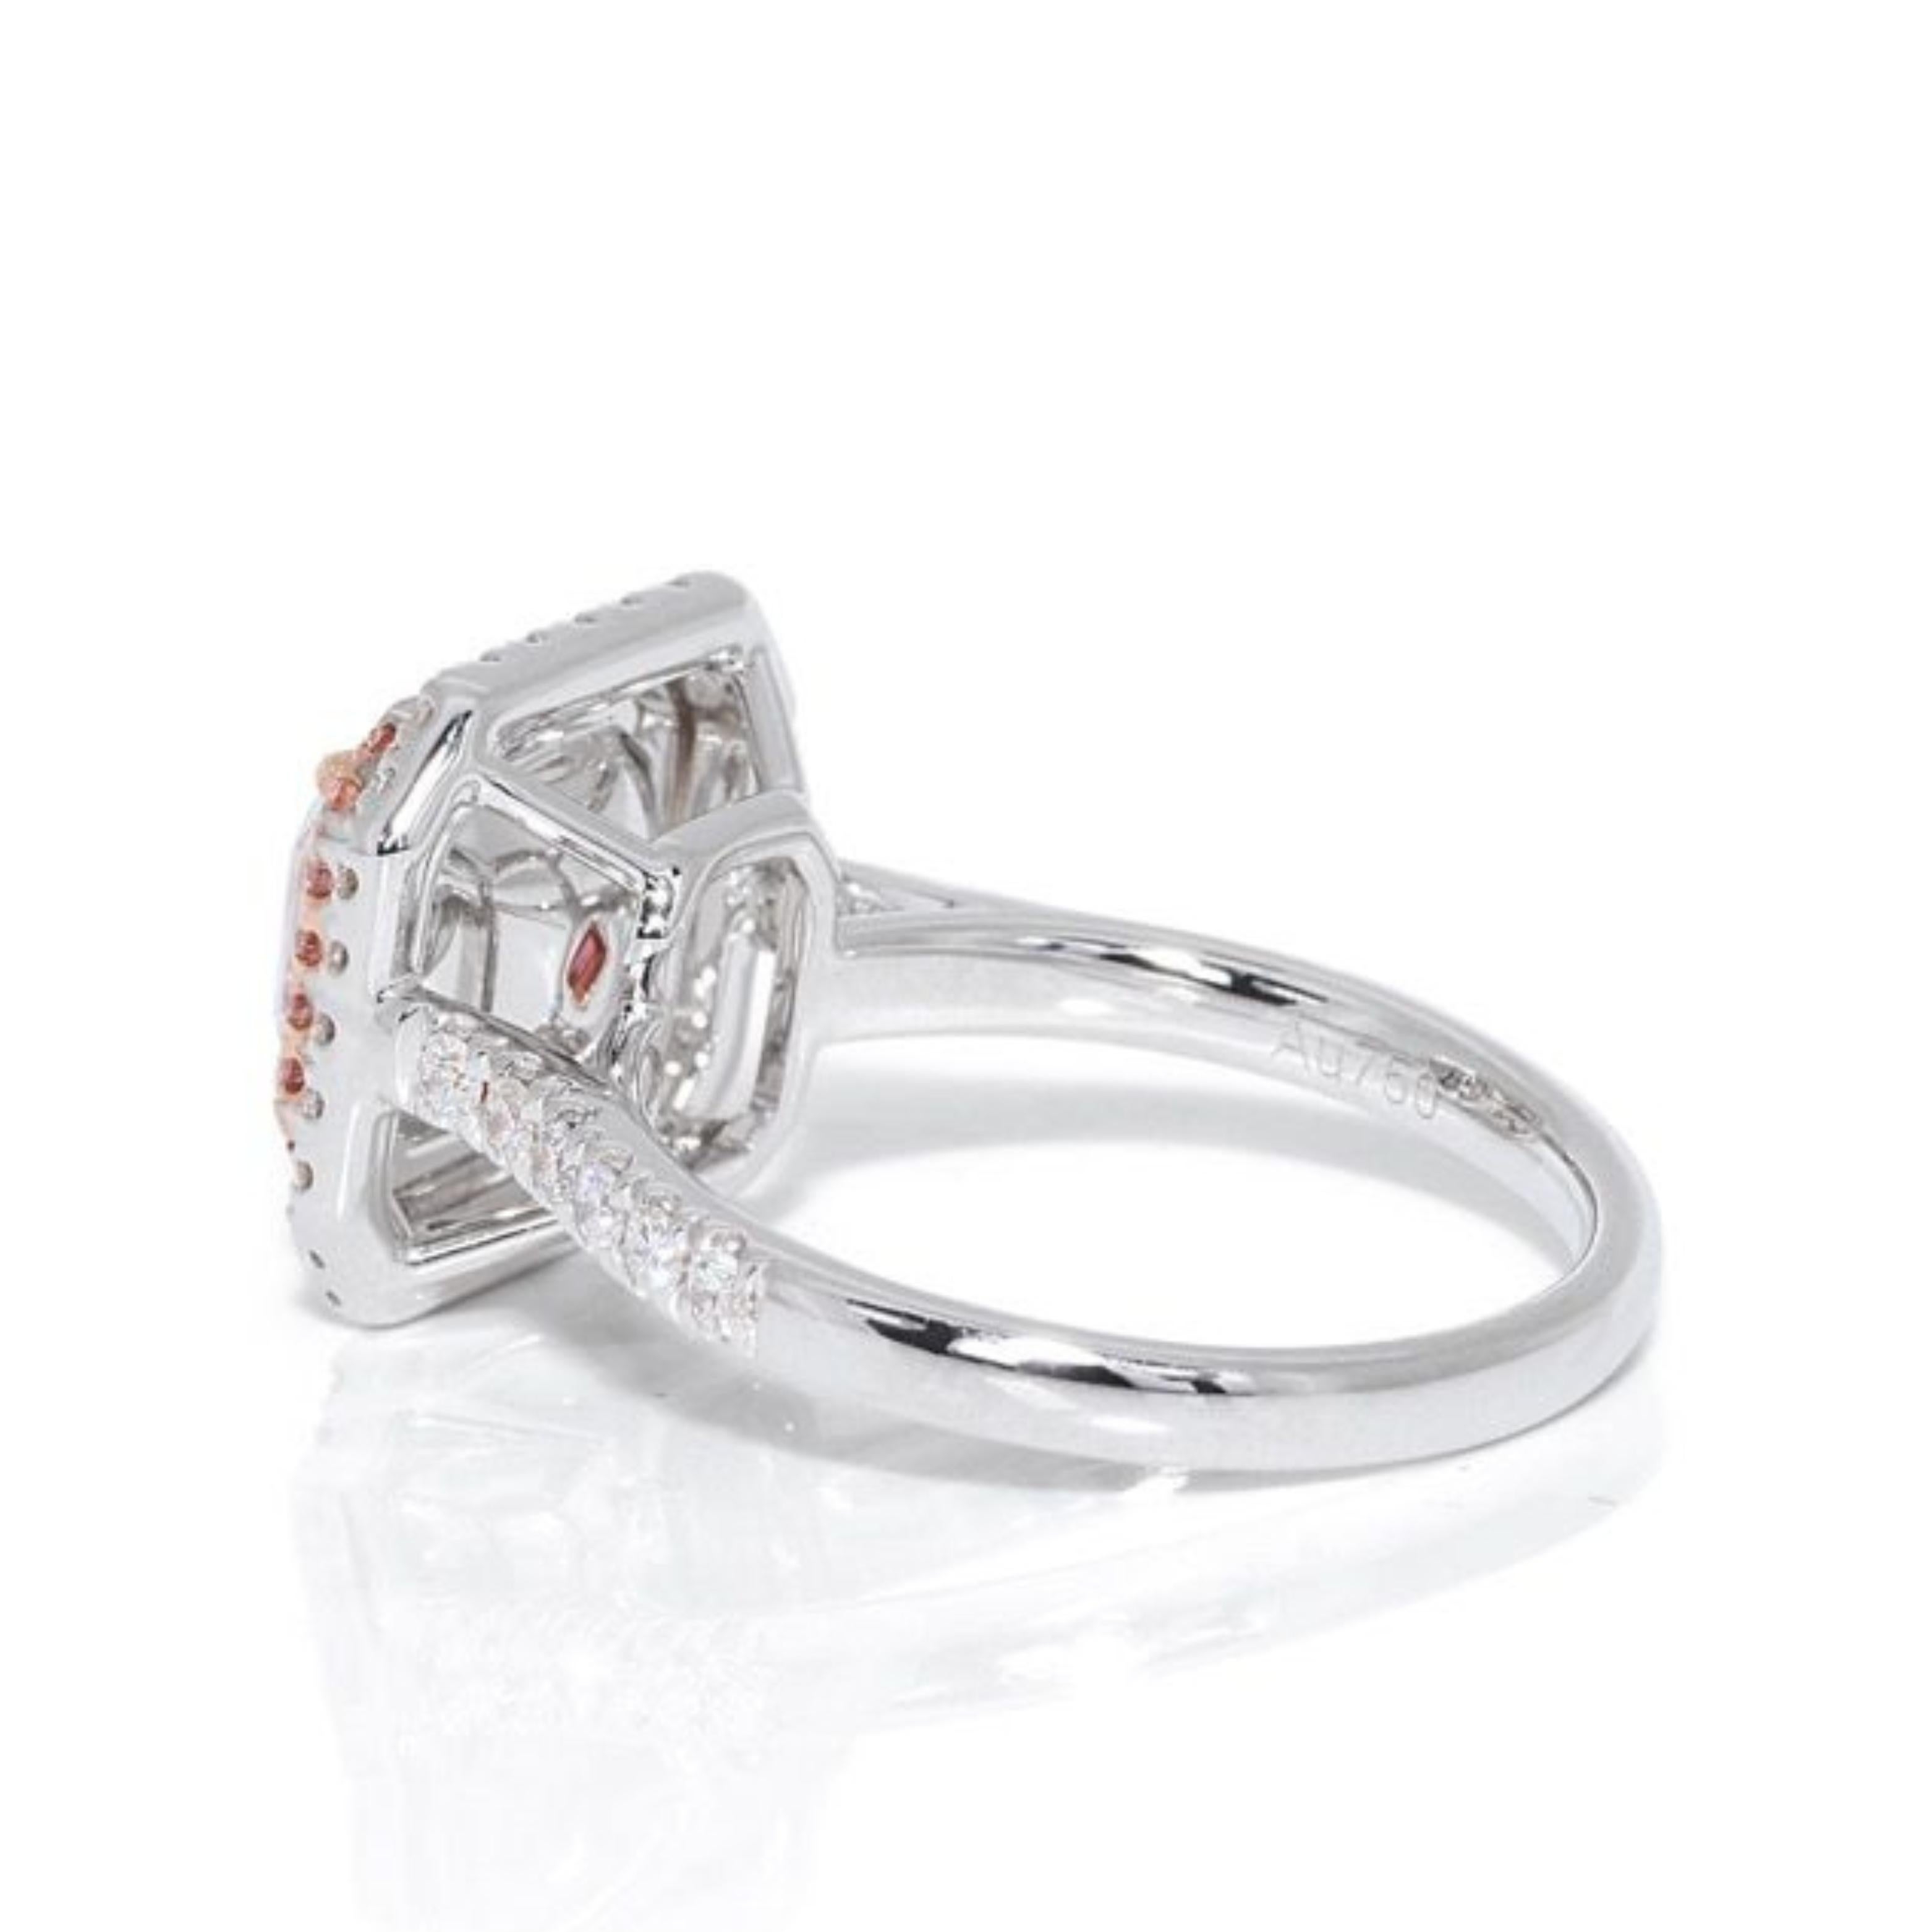 Captivating 1.86ct. Square Radiant Halo Diamond Ring In New Condition For Sale In רמת גן, IL